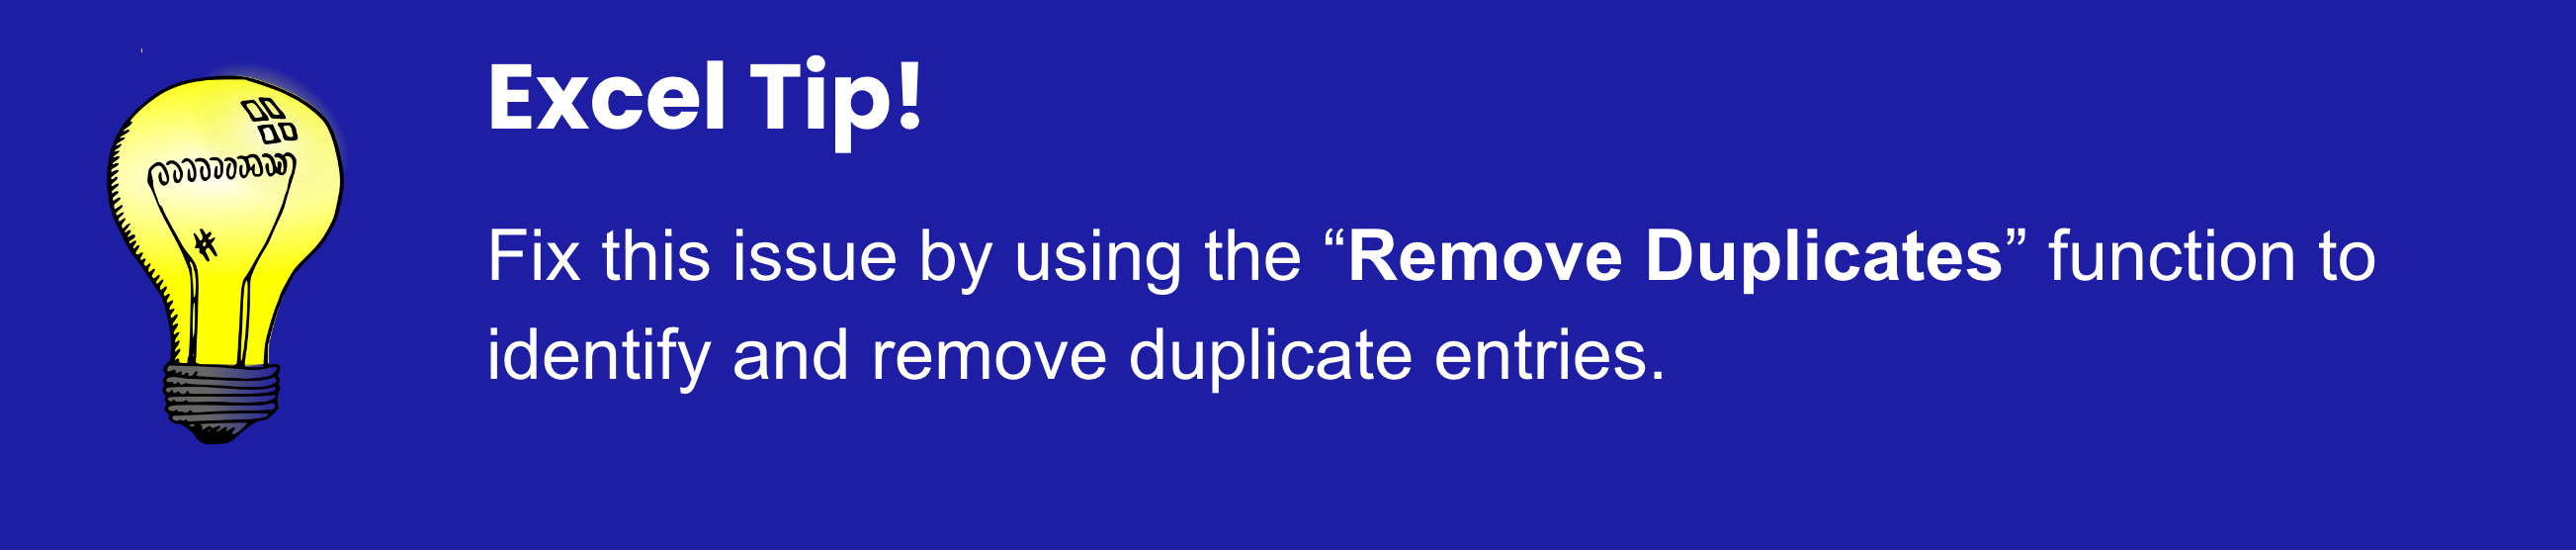 Data cleaning technique tip in Excel - remove duplicates